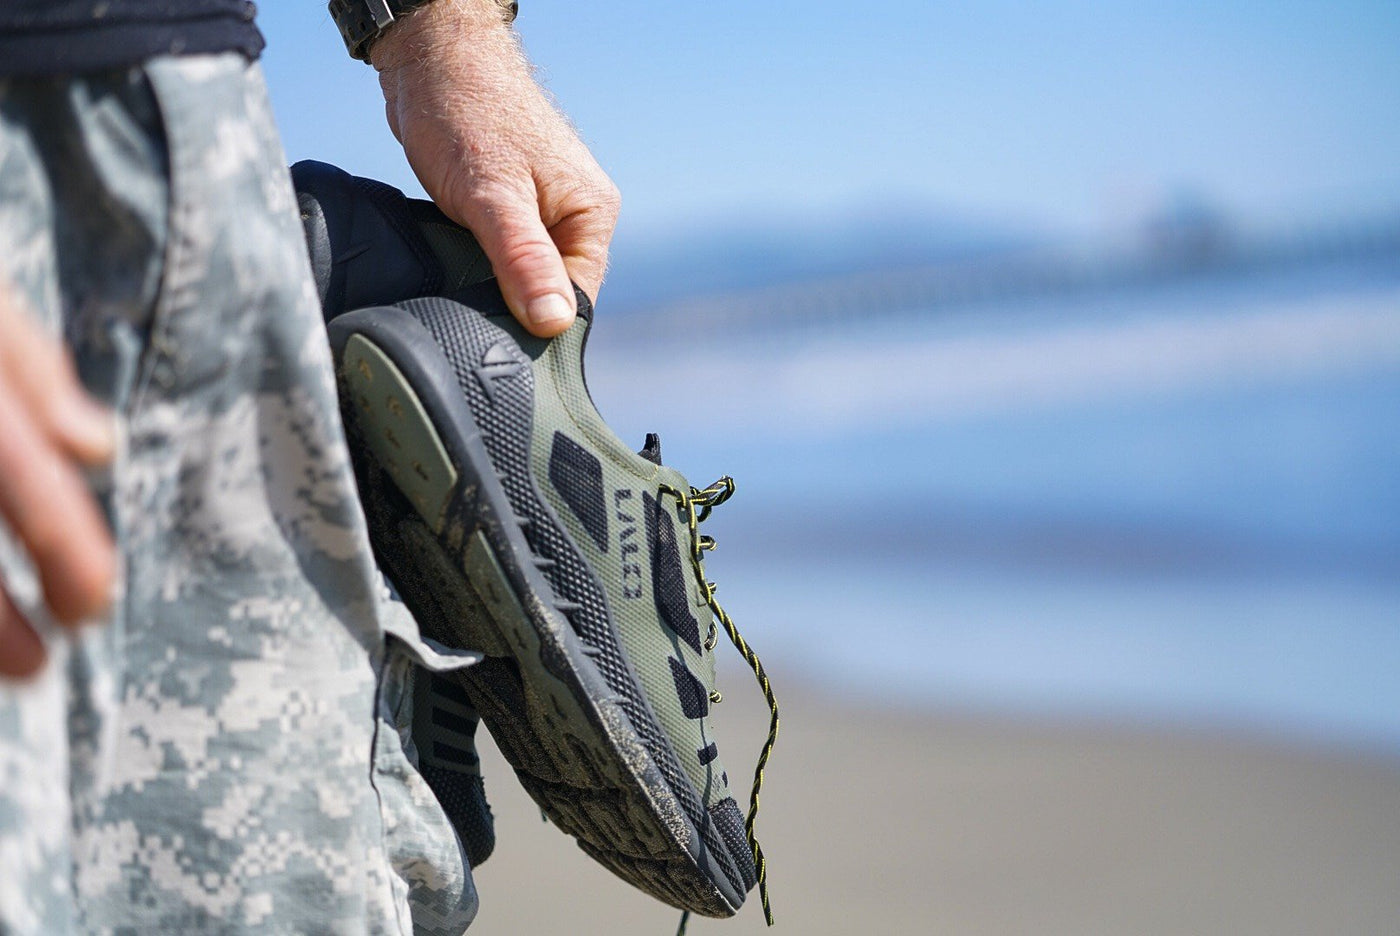 LALO has the shoe for you whether it's a military career, competing in an adventure race, cross training, tackling an urban athletic workout, or running a 5K. Grinder, zodiac recon, bloodbird, intruder, rapid assault tactical boots, military boots.